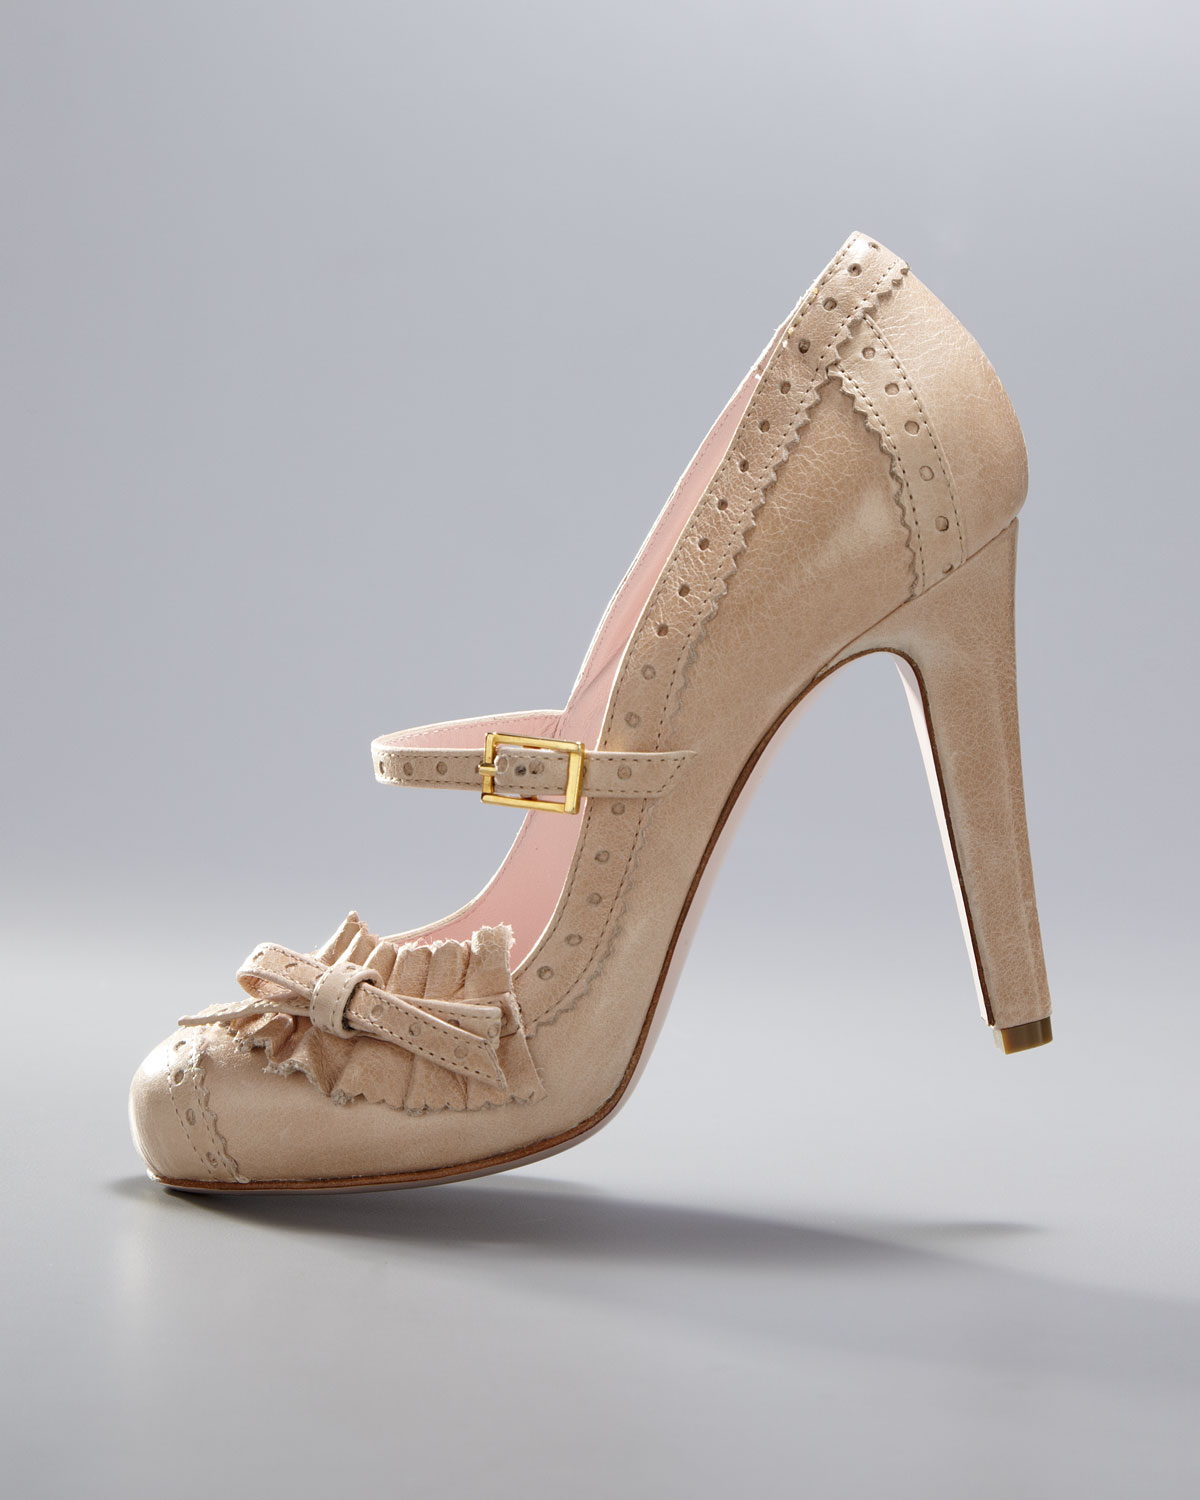 Lyst - Red Valentino Vintage Mary Jane Pump in Natural